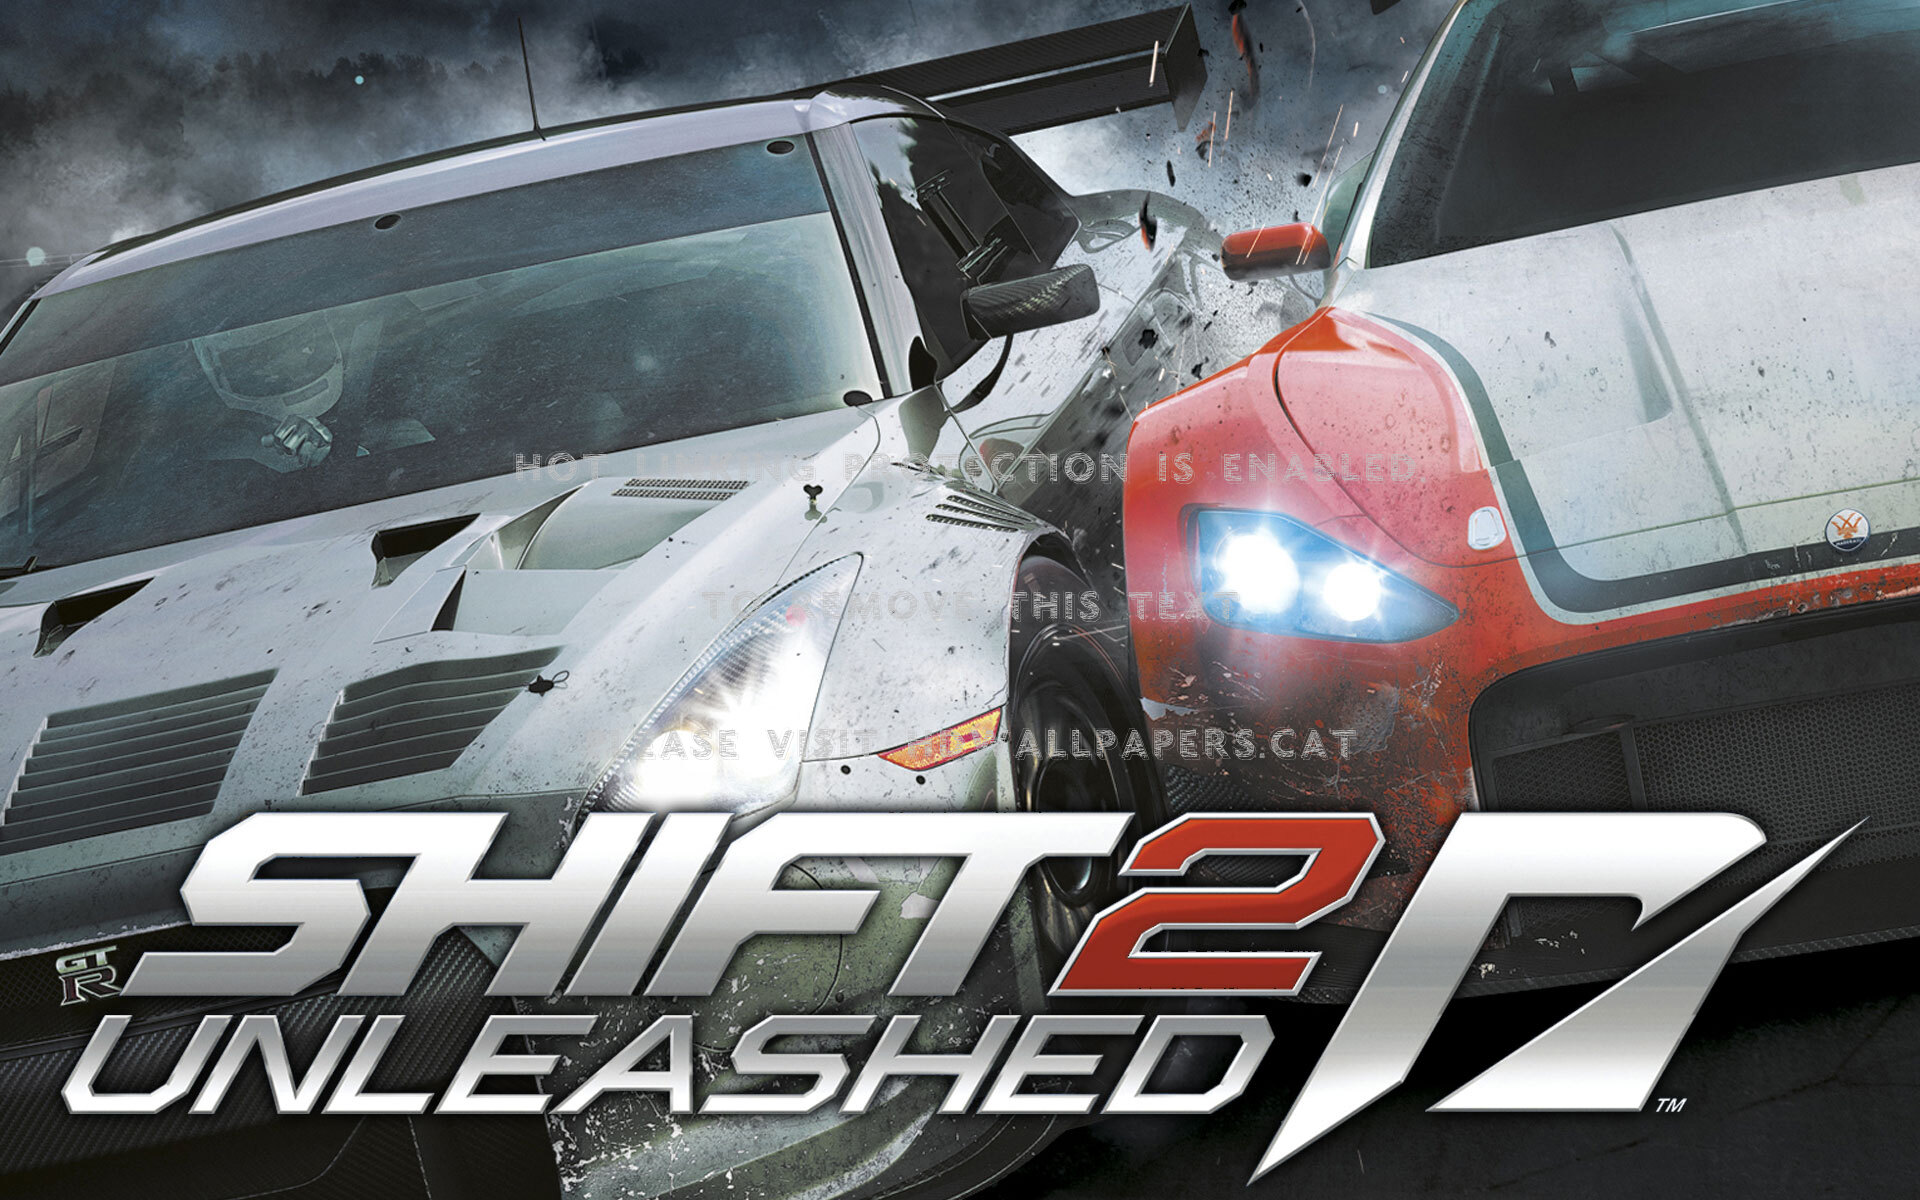 Need For Speed: Shift 2 Unleashed Wallpapers